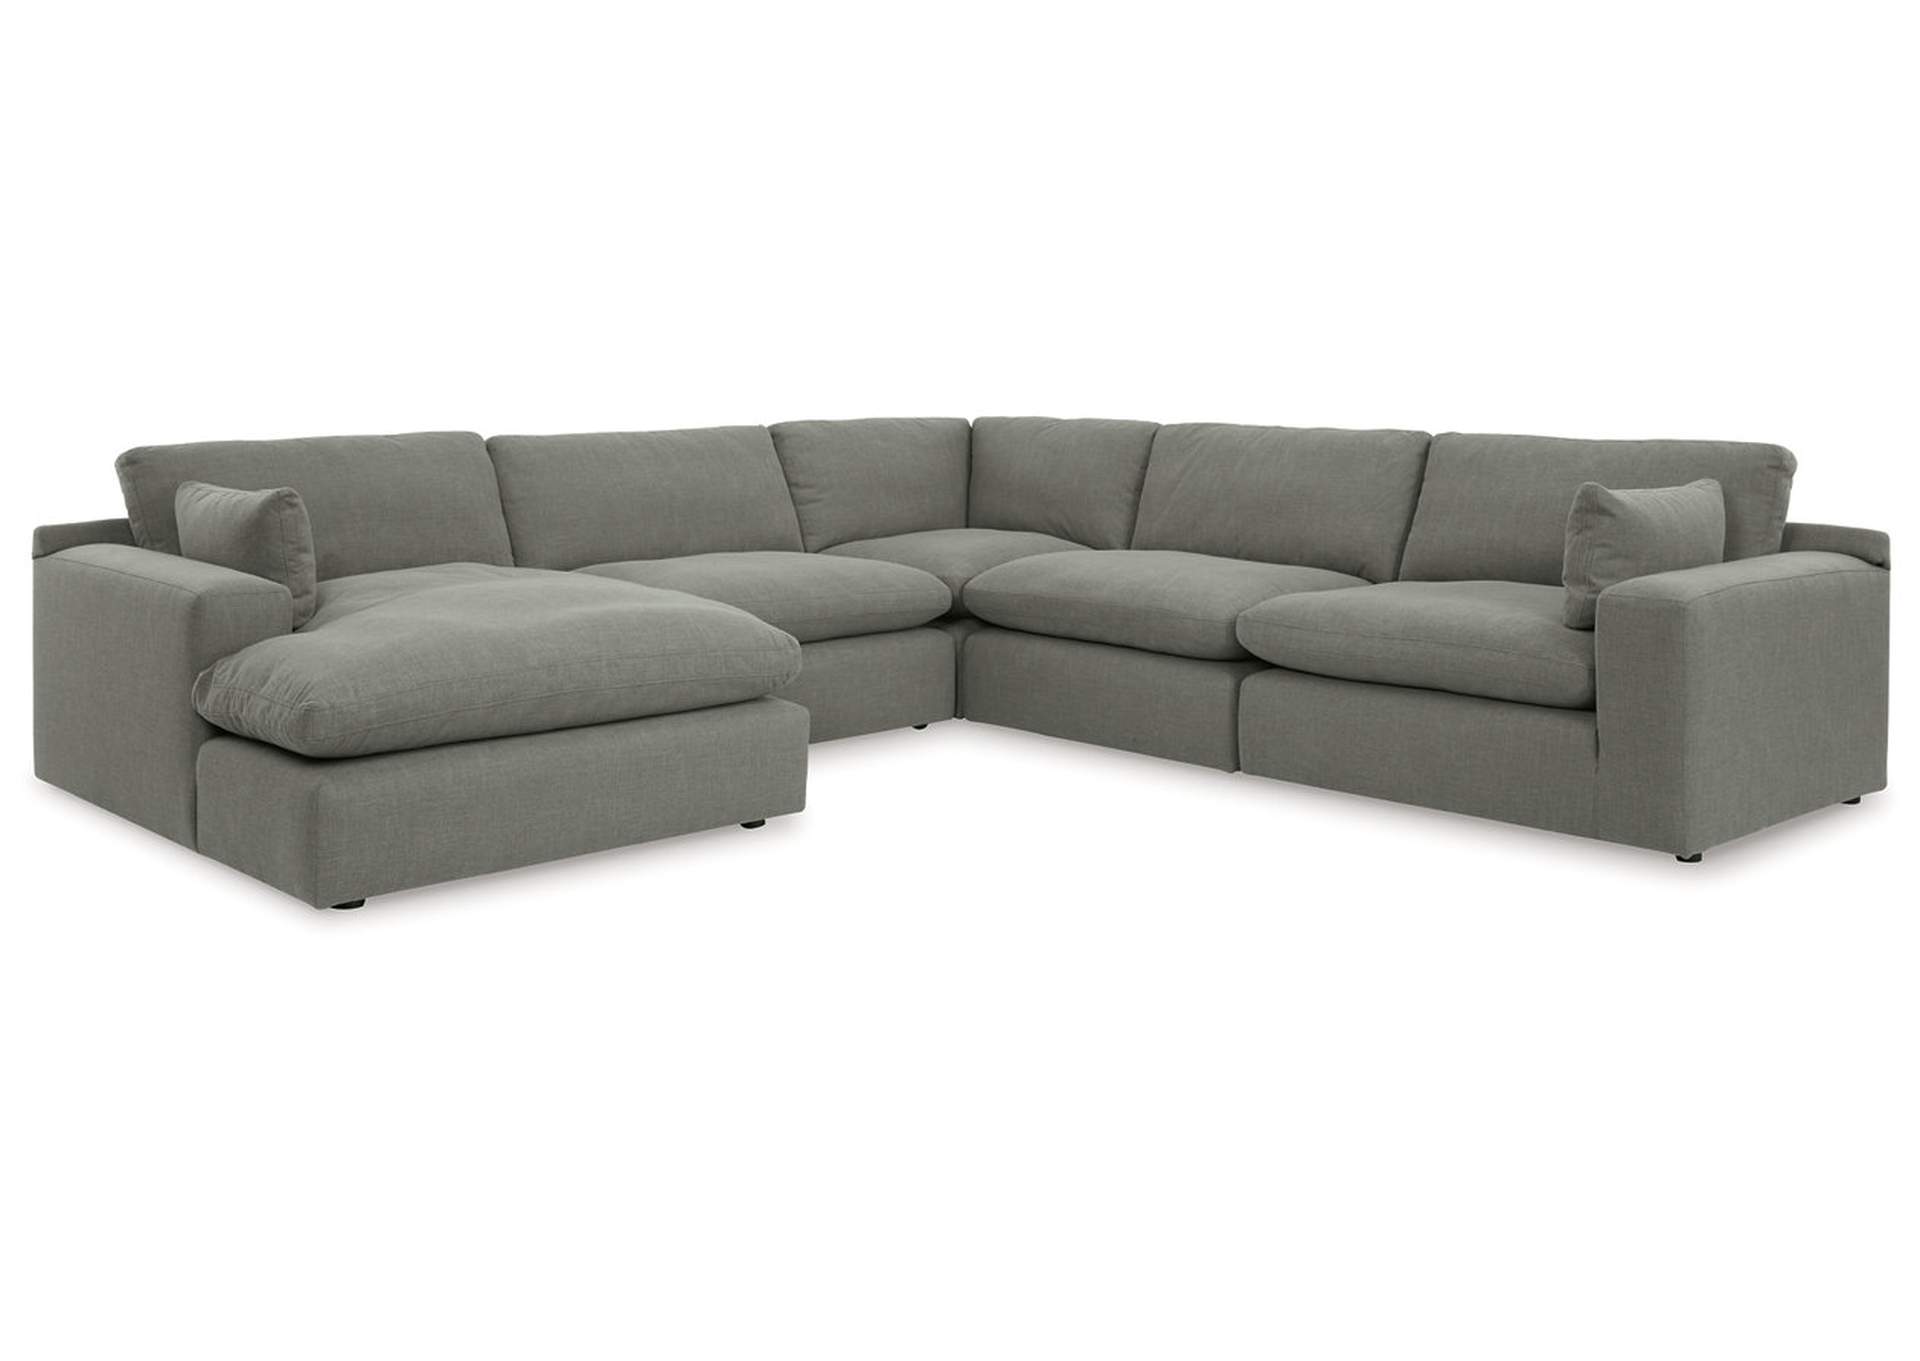 Elyza 5-Piece Sectional with Ottoman,Benchcraft